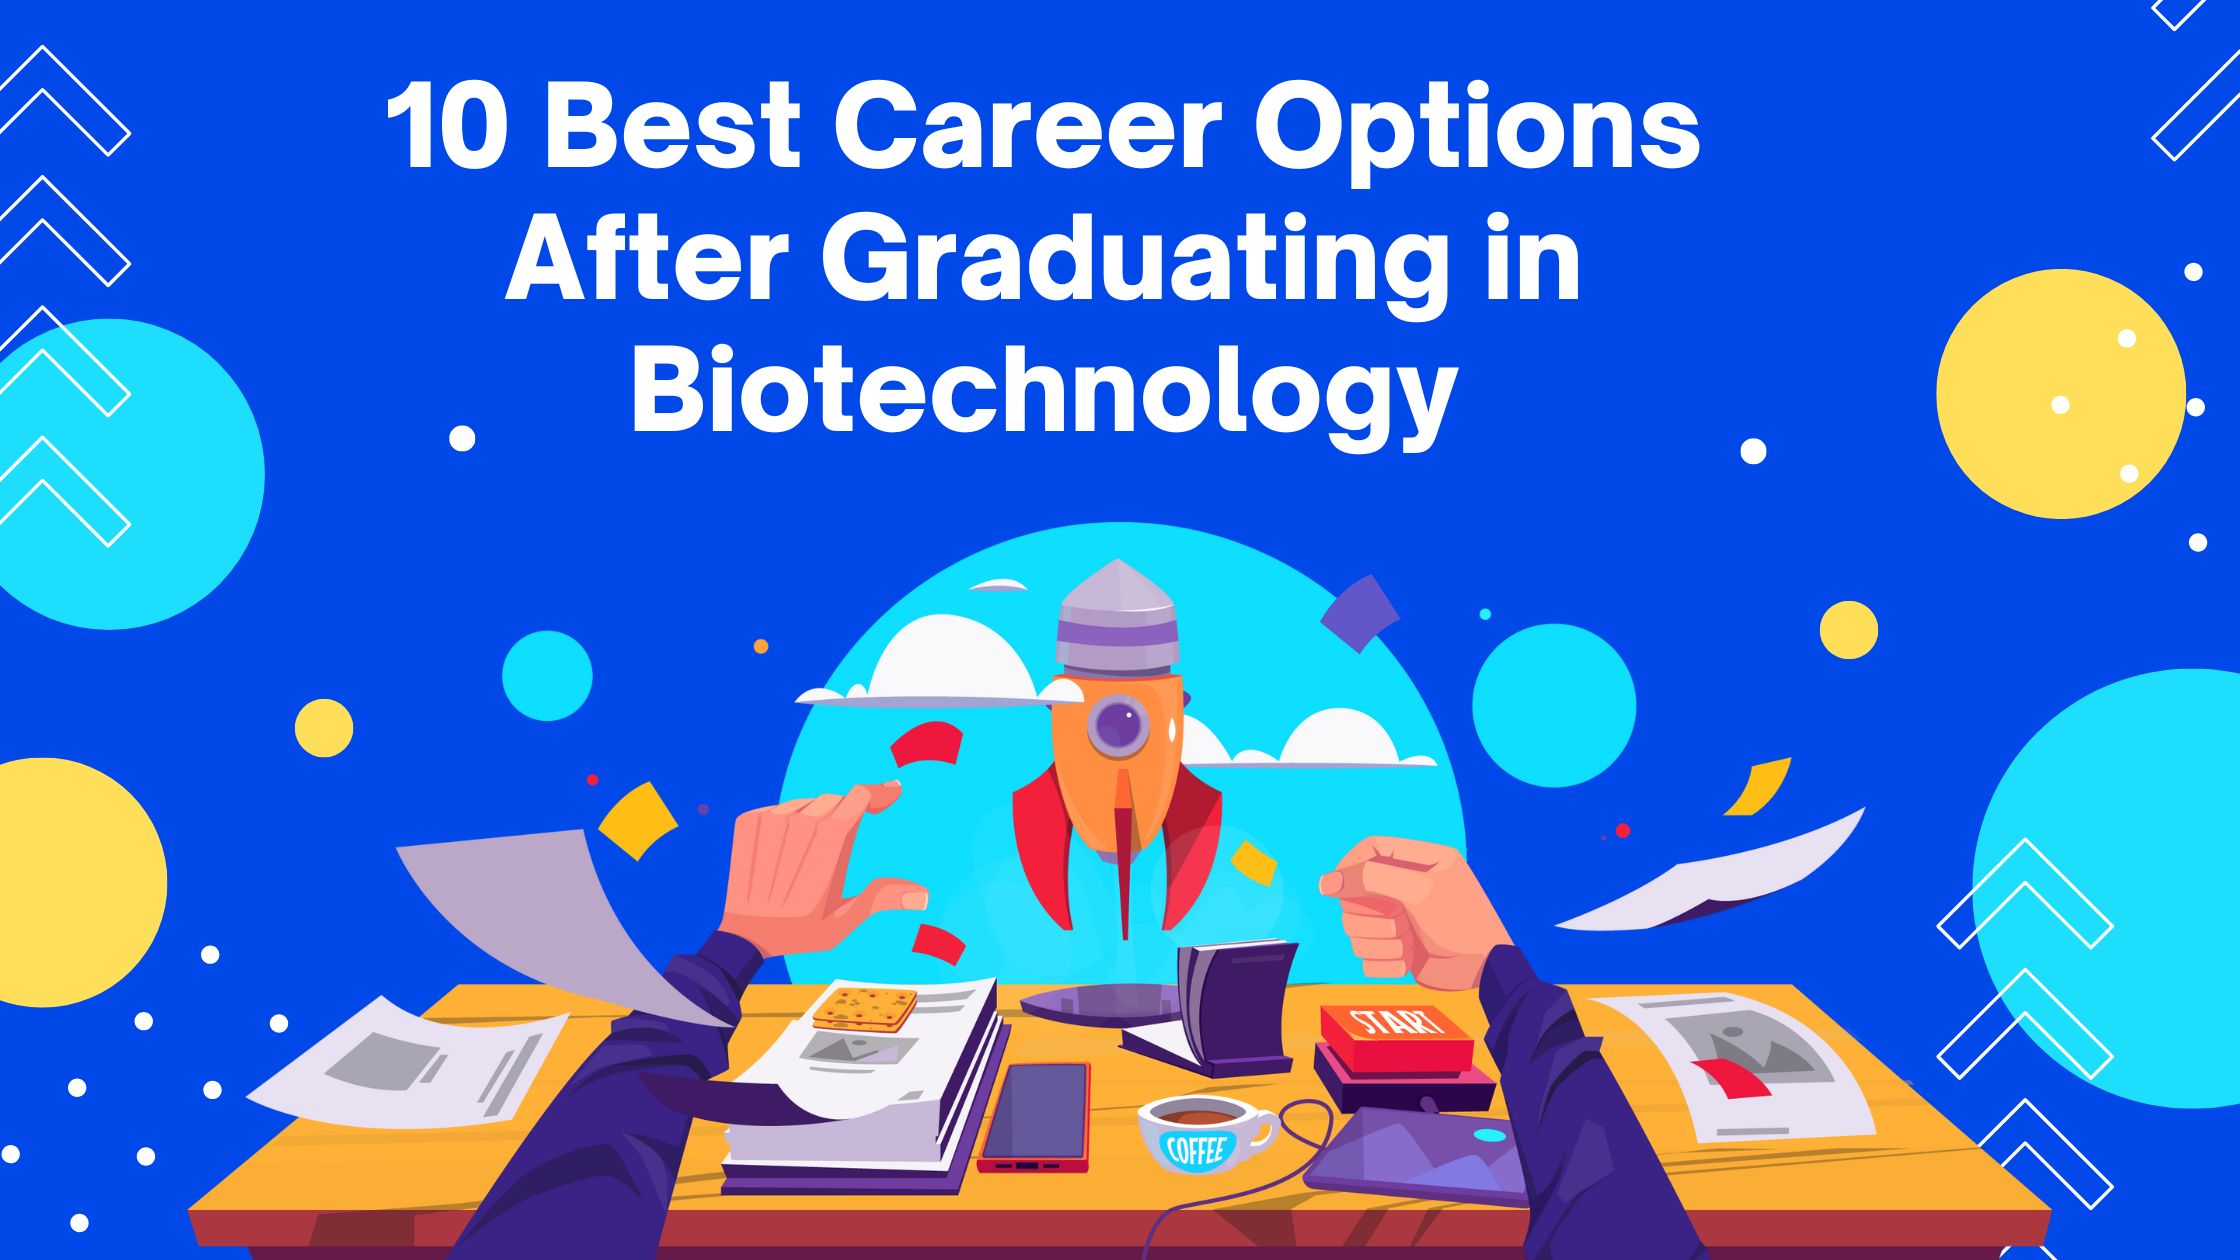 10 Best Career Options After Graduating in Biotechnology